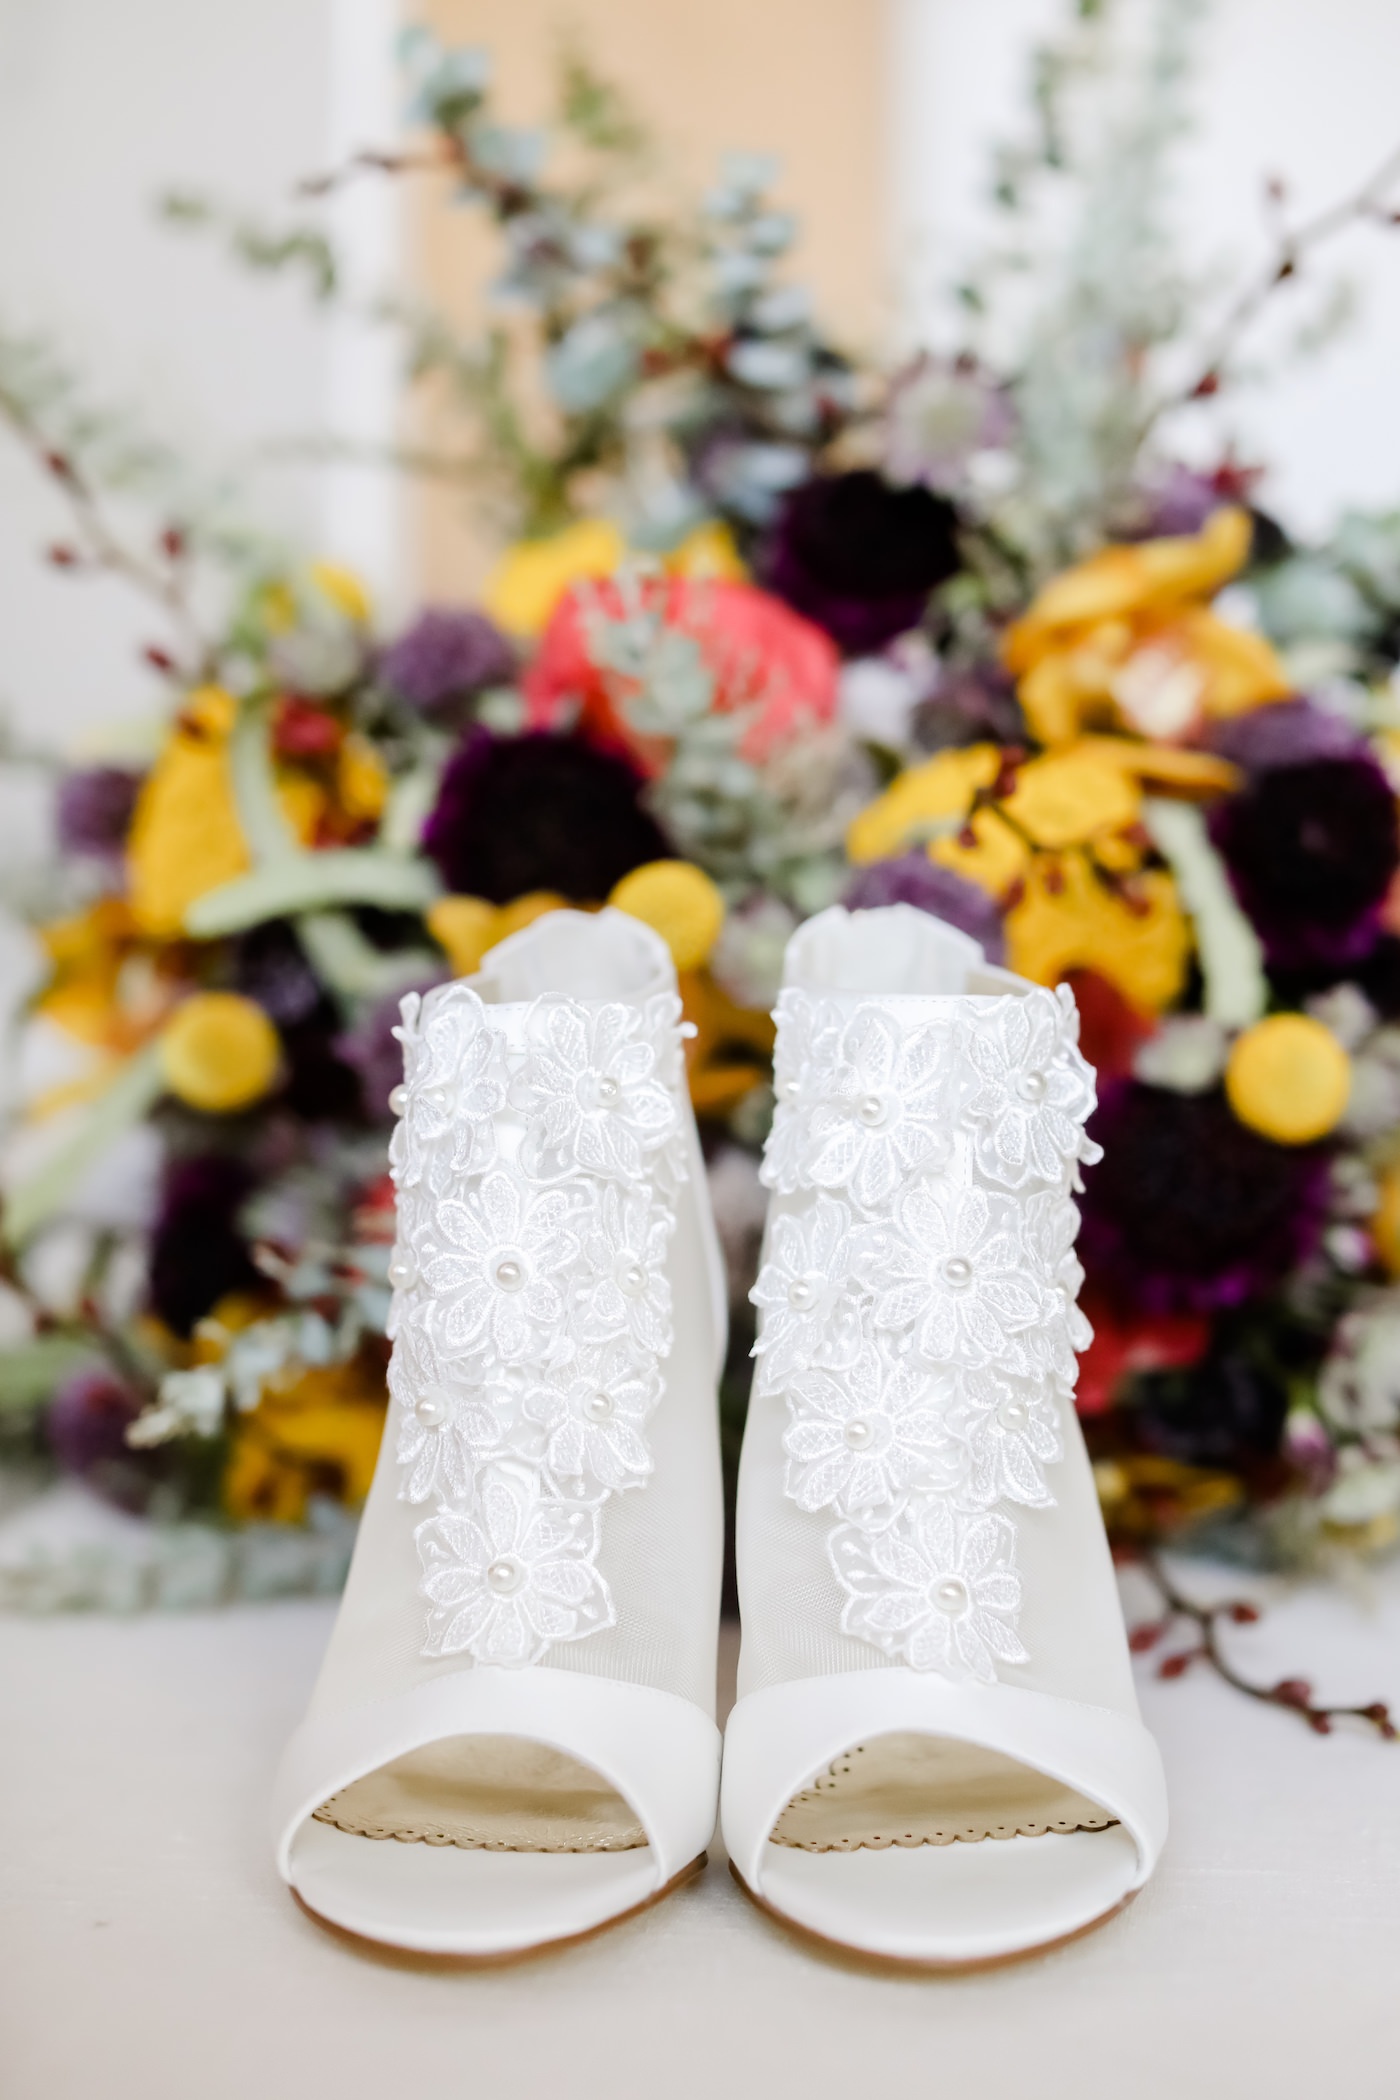 Vintage Inspired White Wedding Shoes, Sheer Lace and Illusion Open Toe Ankle Boots | Florida Wedding Photographer Lifelong Photography Studios